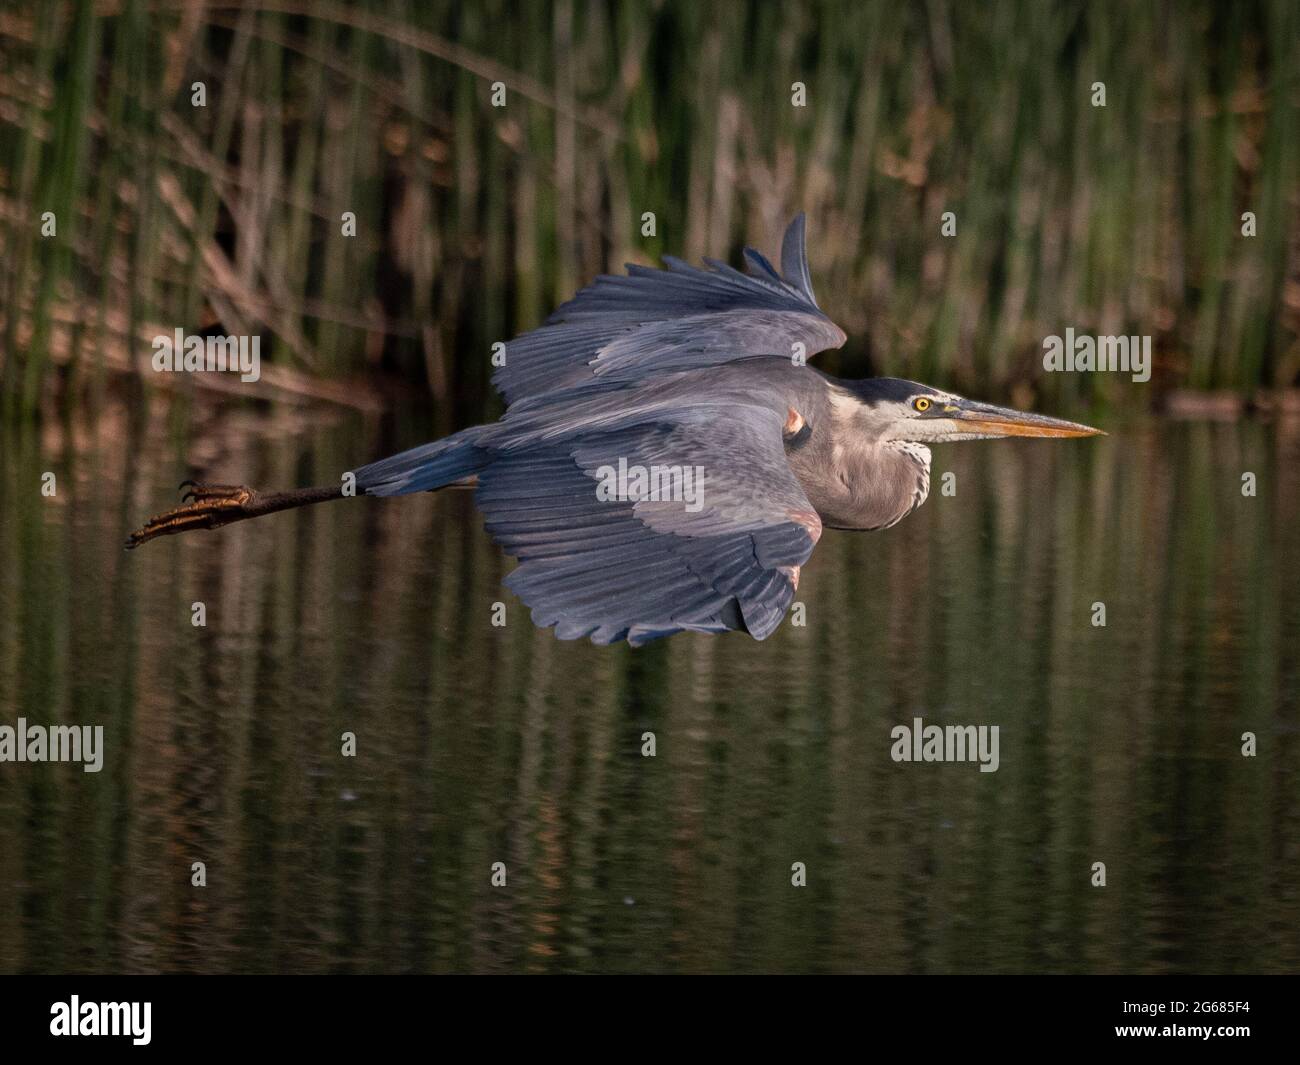 A great blue heron flying above a pond with reeds in the background. Stock Photo